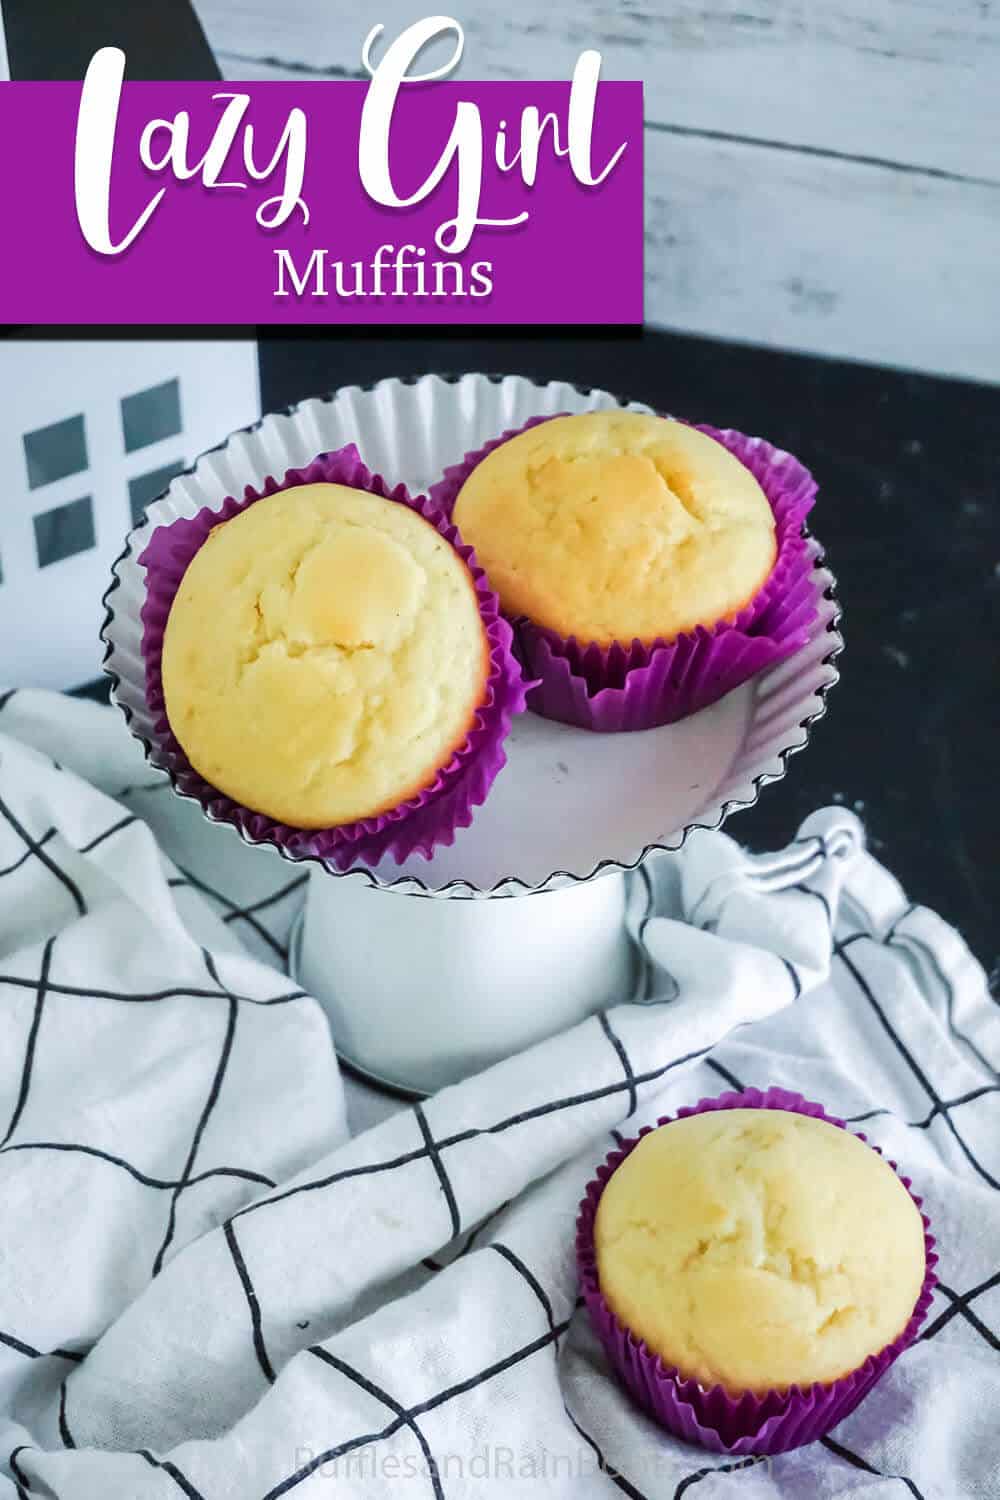 easy breakfast muffin recipe you can't mess up with text which reads lazy girl muffins